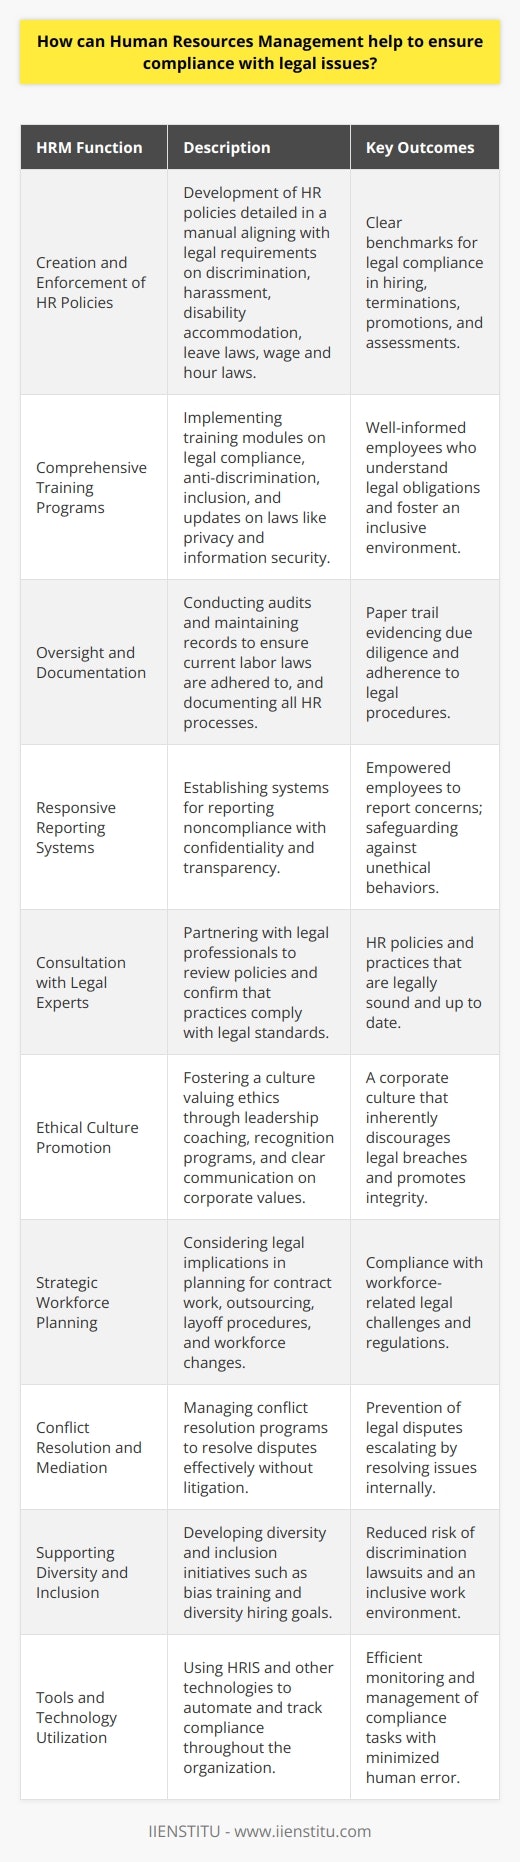 Human Resources Management (HRM) functions as a guardian of legality in the workplace, safeguarding a business against the risks of legal noncompliance while fostering an environment of ethical work practices. Here are several ways that HRM actively ensures adherence to laws and regulations:**Creation and Enforcement of HR Policies**Developing a detailed HR manual is a first line of defense. These policies must articulate the legal requirements concerning workplace discrimination, harassment policies, accommodation of disabilities, parental and medical leave laws, and adherence to wage and hour laws. By codifying procedures on hiring, terminations, promotions, and employee assessments, HRM creates benchmarks that are in line with legal standards.**Comprehensive Training Programs**HRM is instrumental in rolling out training modules that focus on legal compliance. Such programs might, for instance, educate employees on not only the existence of anti-discrimination laws but also on how to foster an inclusive workplace. Regular training ensures that employees are up to date with shifting legal landscapes, especially important in rapidly changing areas such as privacy and information security.**Oversight and Documentation**HRM must be vigilant in audits and record-keeping, which can prove indispensable when facing allegations of noncompliance. They can undertake regular checks of their own policies against current labor laws, identifying gaps or outdated practices that could result in legal woes. Rigorous documentation, from hiring records to disciplinary actions, forms a paper trail that demonstrates due diligence and procedural fairness.**Responsive Reporting Systems**Implementing robust systems for reporting noncompliance or workplace concerns is another key function of HRM. Such systems encourage transparency and give workers a clear path to report illegal or unethical behaviors. HRM, through carefully crafted policies, provides whistleblowers with the reassurance that their reports will be treated seriously and with strict confidentiality.**Consultation with Legal Experts**HR professionals cannot operate in a vacuum regarding legal complexities. Hence, they often work in tandem with legal experts or employment law attorneys to refine policies and ensure that their company's practices remain within legal parameters. Regular consultations can make HRM proactive rather than reactive to legal issues.**Ethical Culture Promotion**Beyond legal compliance, HRM has a strategic position to foster a culture that values ethical behavior. By promoting a culture of integrity and compliance, HRM shapes norms that prevent legal breaches. This involves leadership coaching, recognition programs for ethical behavior, and clear communication about the company's values.**Strategic Workforce Planning**HRM must also foresee legal implications in workforce planning, including decisions about contract work, outsourcing, and reductions-in-force. Strategic planning takes into account diverse legal challenges like worker classification, avoiding wrongful termination lawsuits, and ensuring that layoff procedures comply with laws like the WARN Act in the United States.**Conflict Resolution and Mediation**Addressing disputes quickly and effectively through dispute resolution and mediation can prevent legal issues from escalating. HRM can oversee conflict management programs, providing employees with a non-litigious pathway to resolve grievances.**Supporting Diversity and Inclusion**By actively creating and advocating for diversity and inclusion initiatives, HRM tackles the legal risk of discrimination and fosters a more harmonious workplace. These initiatives may include bias training, diversity hiring goals, and programs to support underrepresented groups within the company.**Tools and Technology Utilization**Finally, HRM increasingly relies on specialized software and tools like human resource information systems (HRIS) to track compliance across the organization. Such tools can automate aspects of compliance, from alerting managers to required legal updates in policies to monitoring overtime compliance.In summary, HR professionals are the stewards of an organization's legal conscience, ensuring that the company not only complies with current laws and regulations but also respects the ethical underpinnings of those laws. It is imperative for businesses to take their advice and implement their strategies seriously, not just to avoid legal pitfalls but to foster a trustworthy and law-abiding corporate culture.